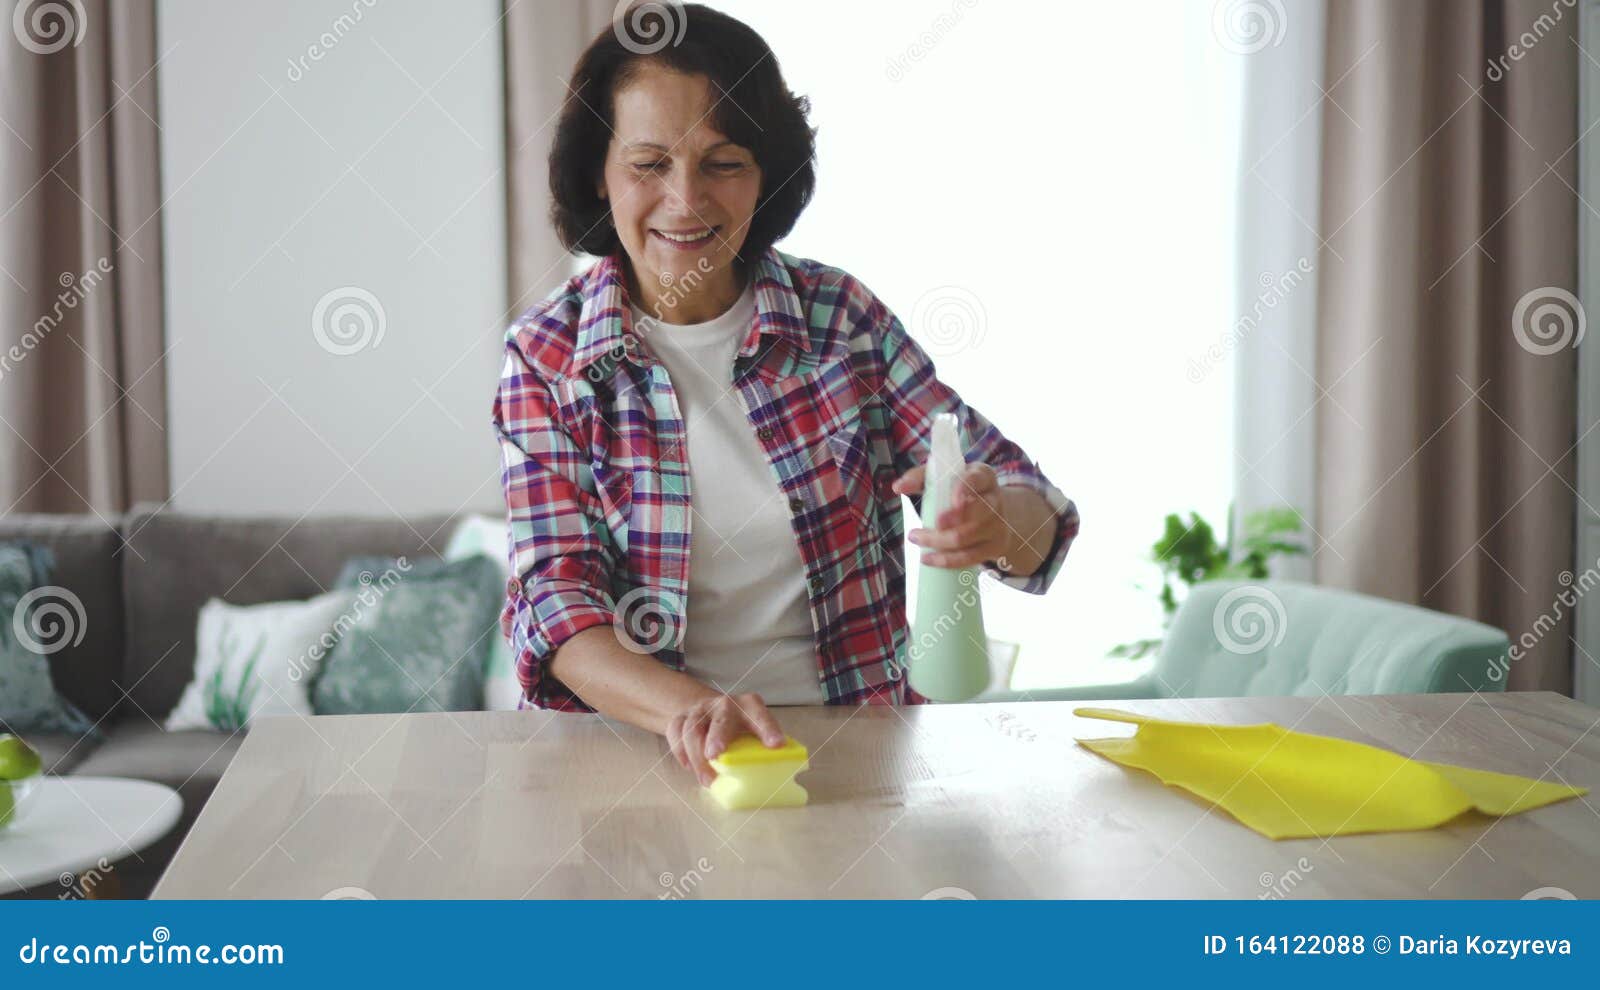 https://thumbs.dreamstime.com/z/happy-elderly-american-woman-cleaning-table-home-living-room-old-female-wash-wooden-desk-holding-bottle-detergent-hand-164122088.jpg